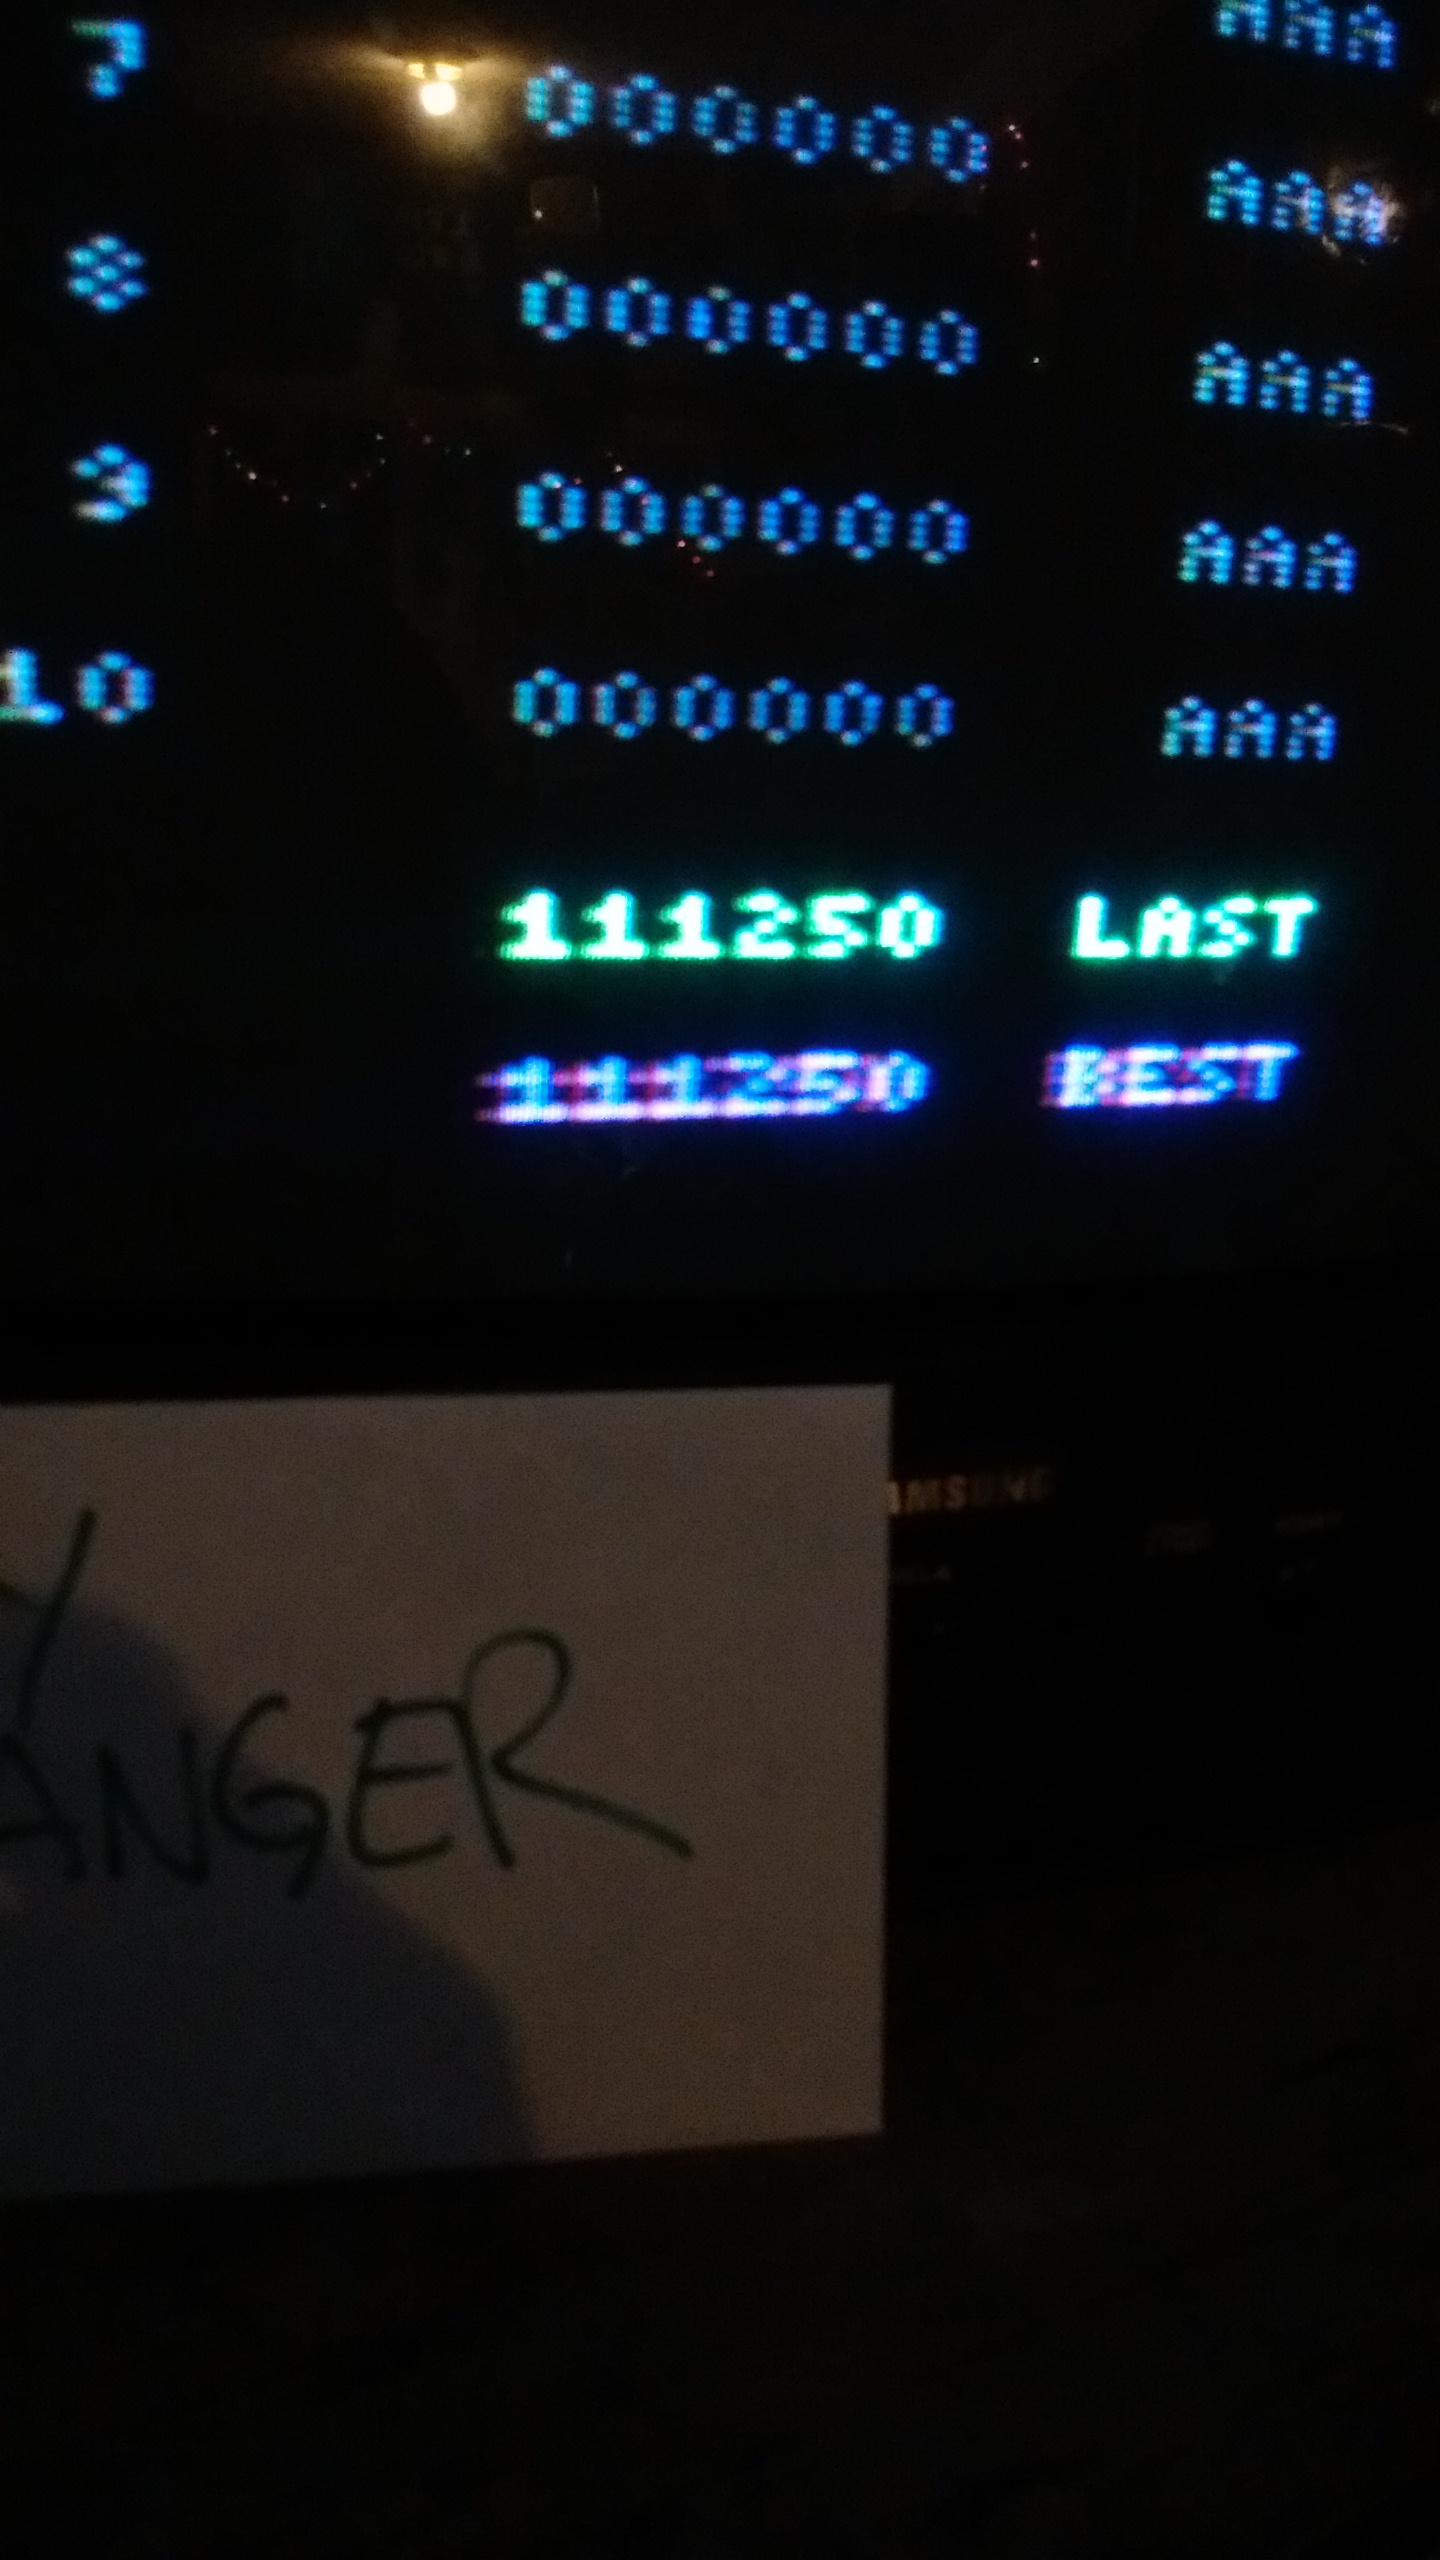 TonyDanger: Juno First (Atari 2600 Expert/A) 111,250 points on 2016-11-21 14:58:48